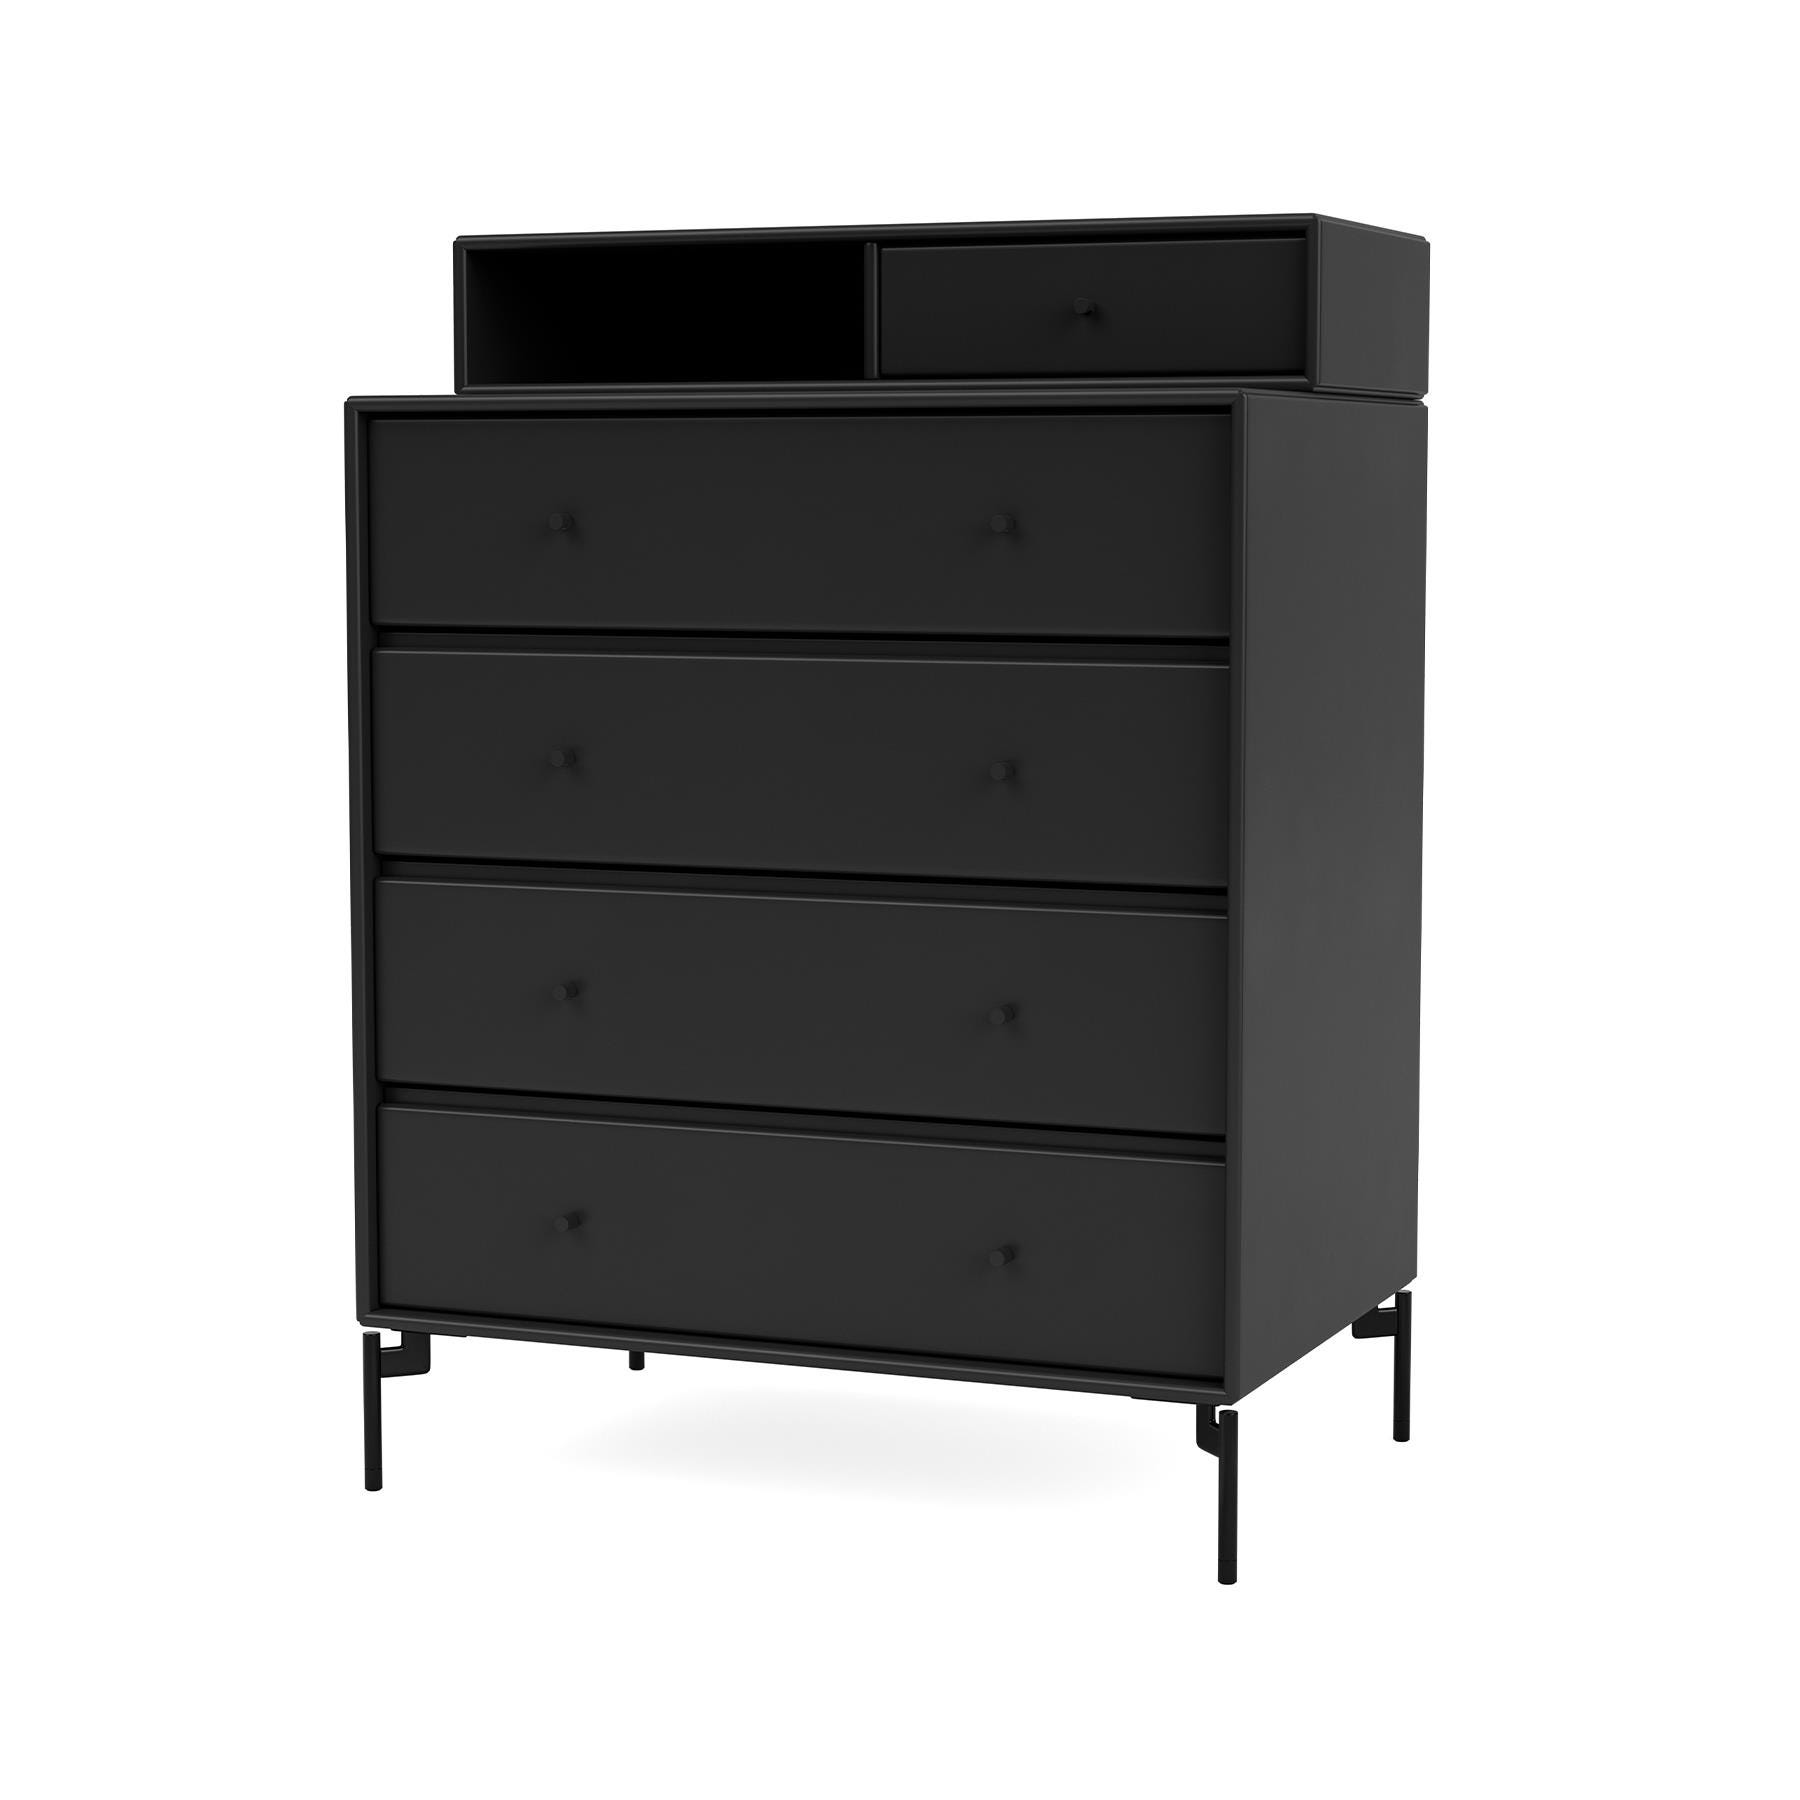 Montana Keep Chest Of Drawers Black Black Legs Designer Furniture From Holloways Of Ludlow